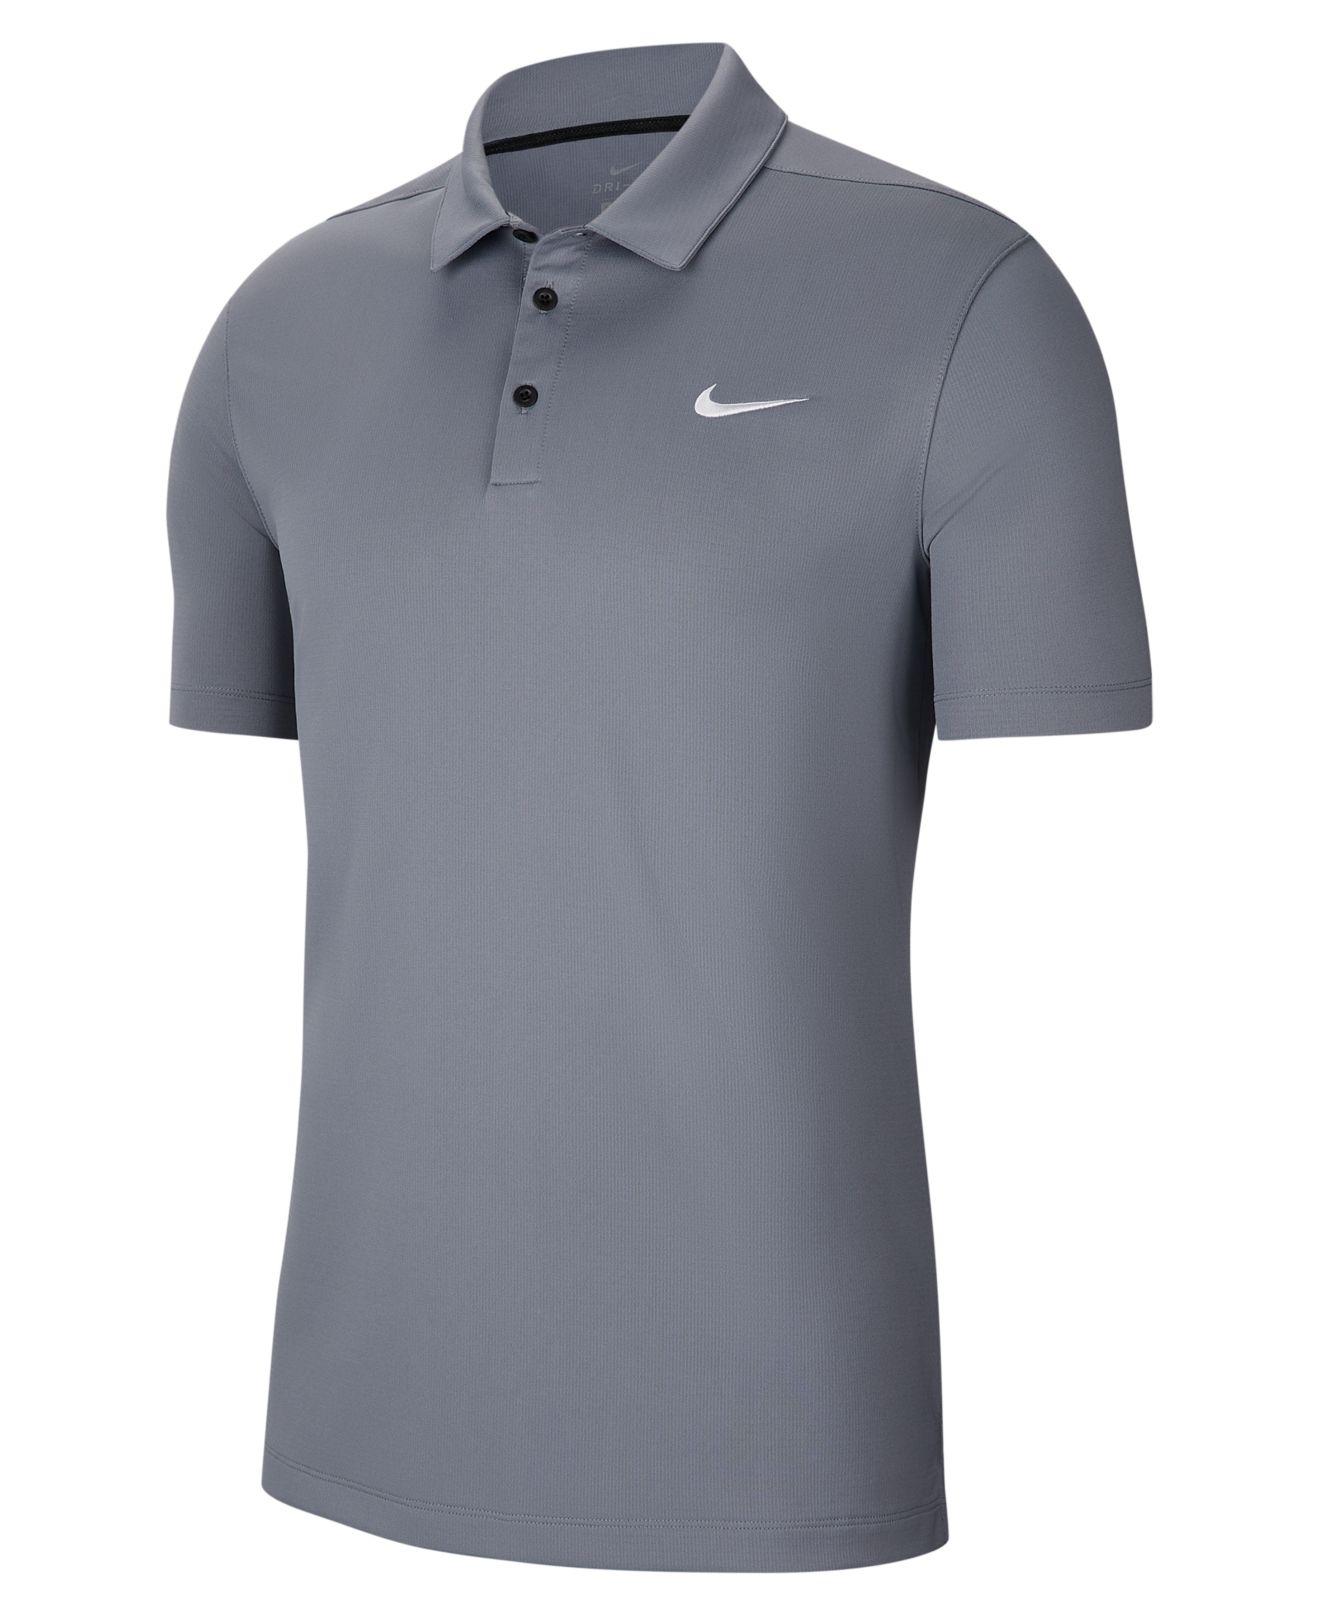 Nike Synthetic Dri-fit Performance Polo in Cool Grey (Gray) for Men - Lyst